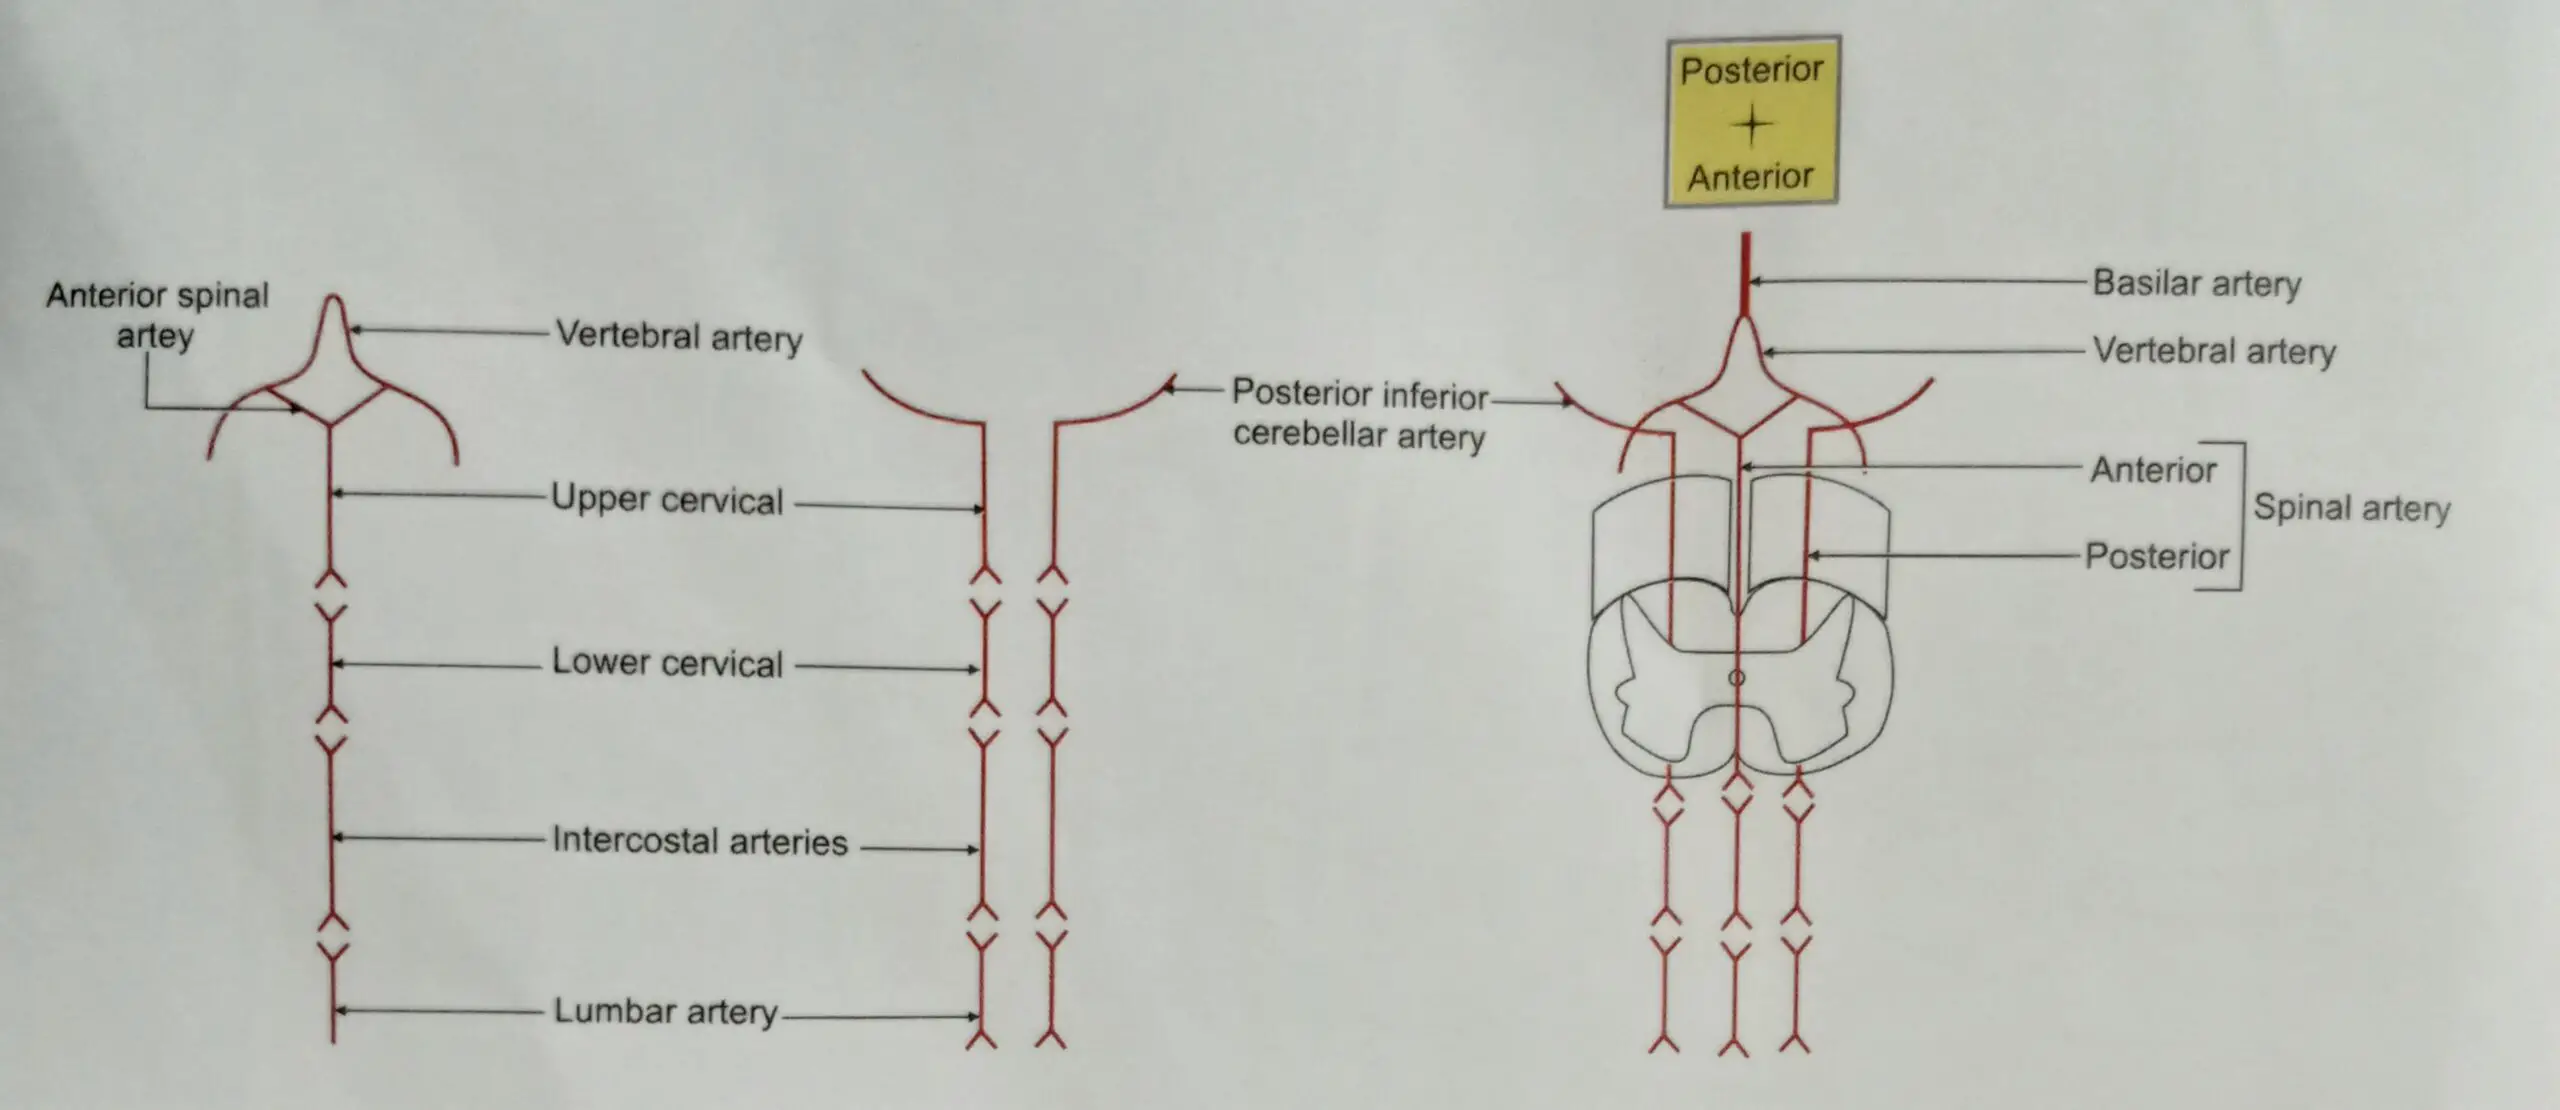 Formation Of the Anterior,posterior and both spinal Arteries in relation